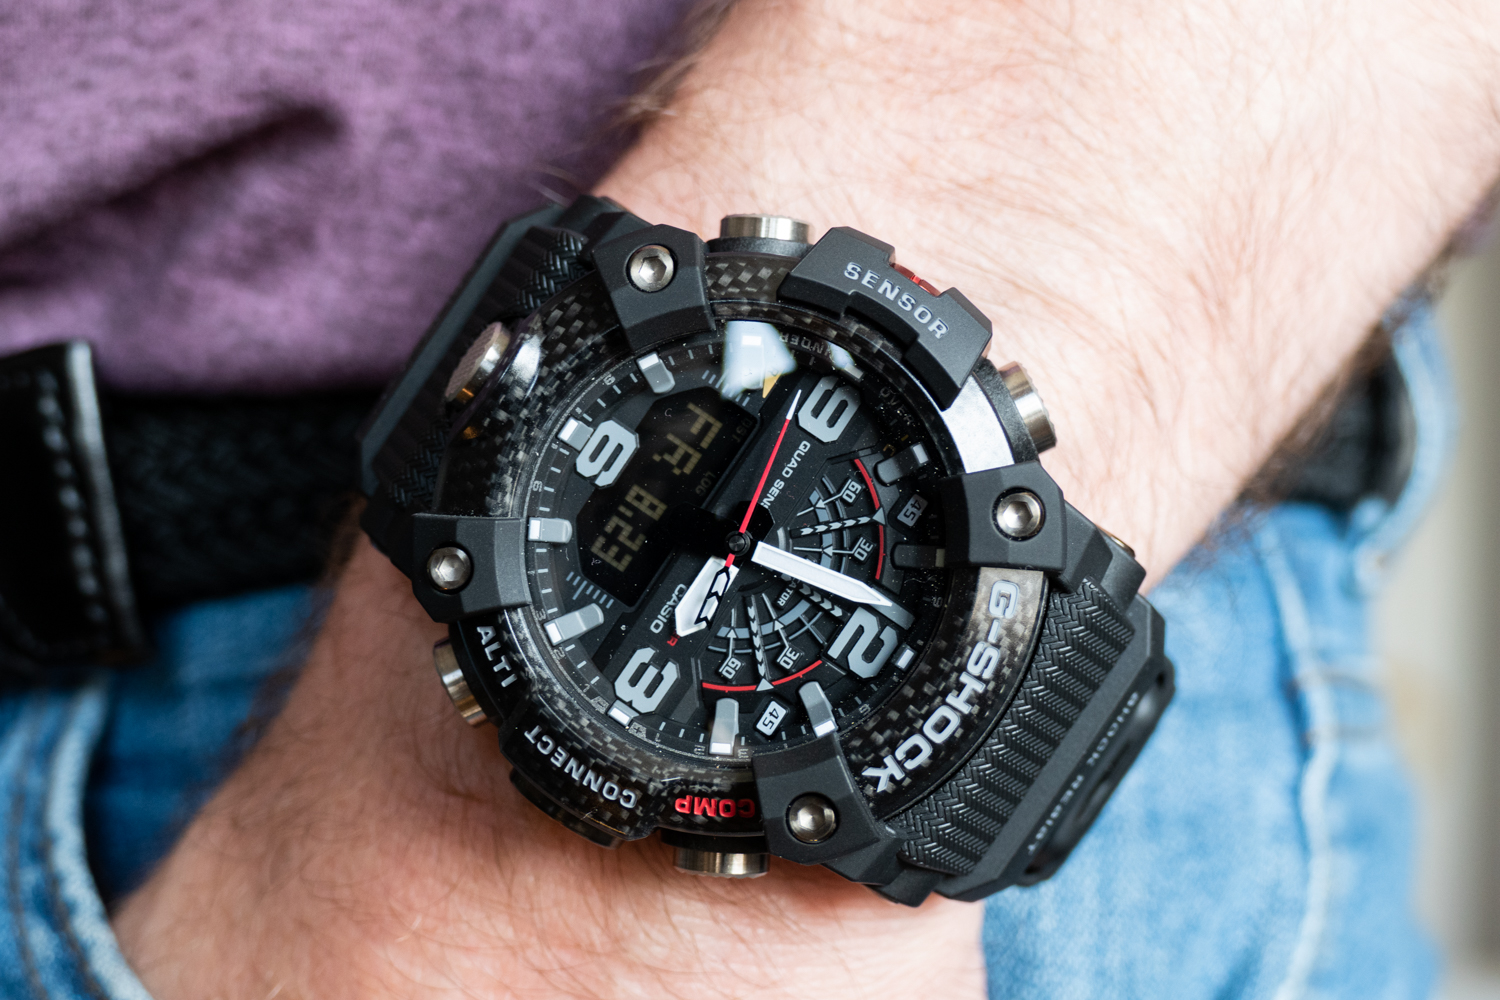 The Carbon-Cased G-Shock Mudmaster Watch is Still as Extreme as Ever